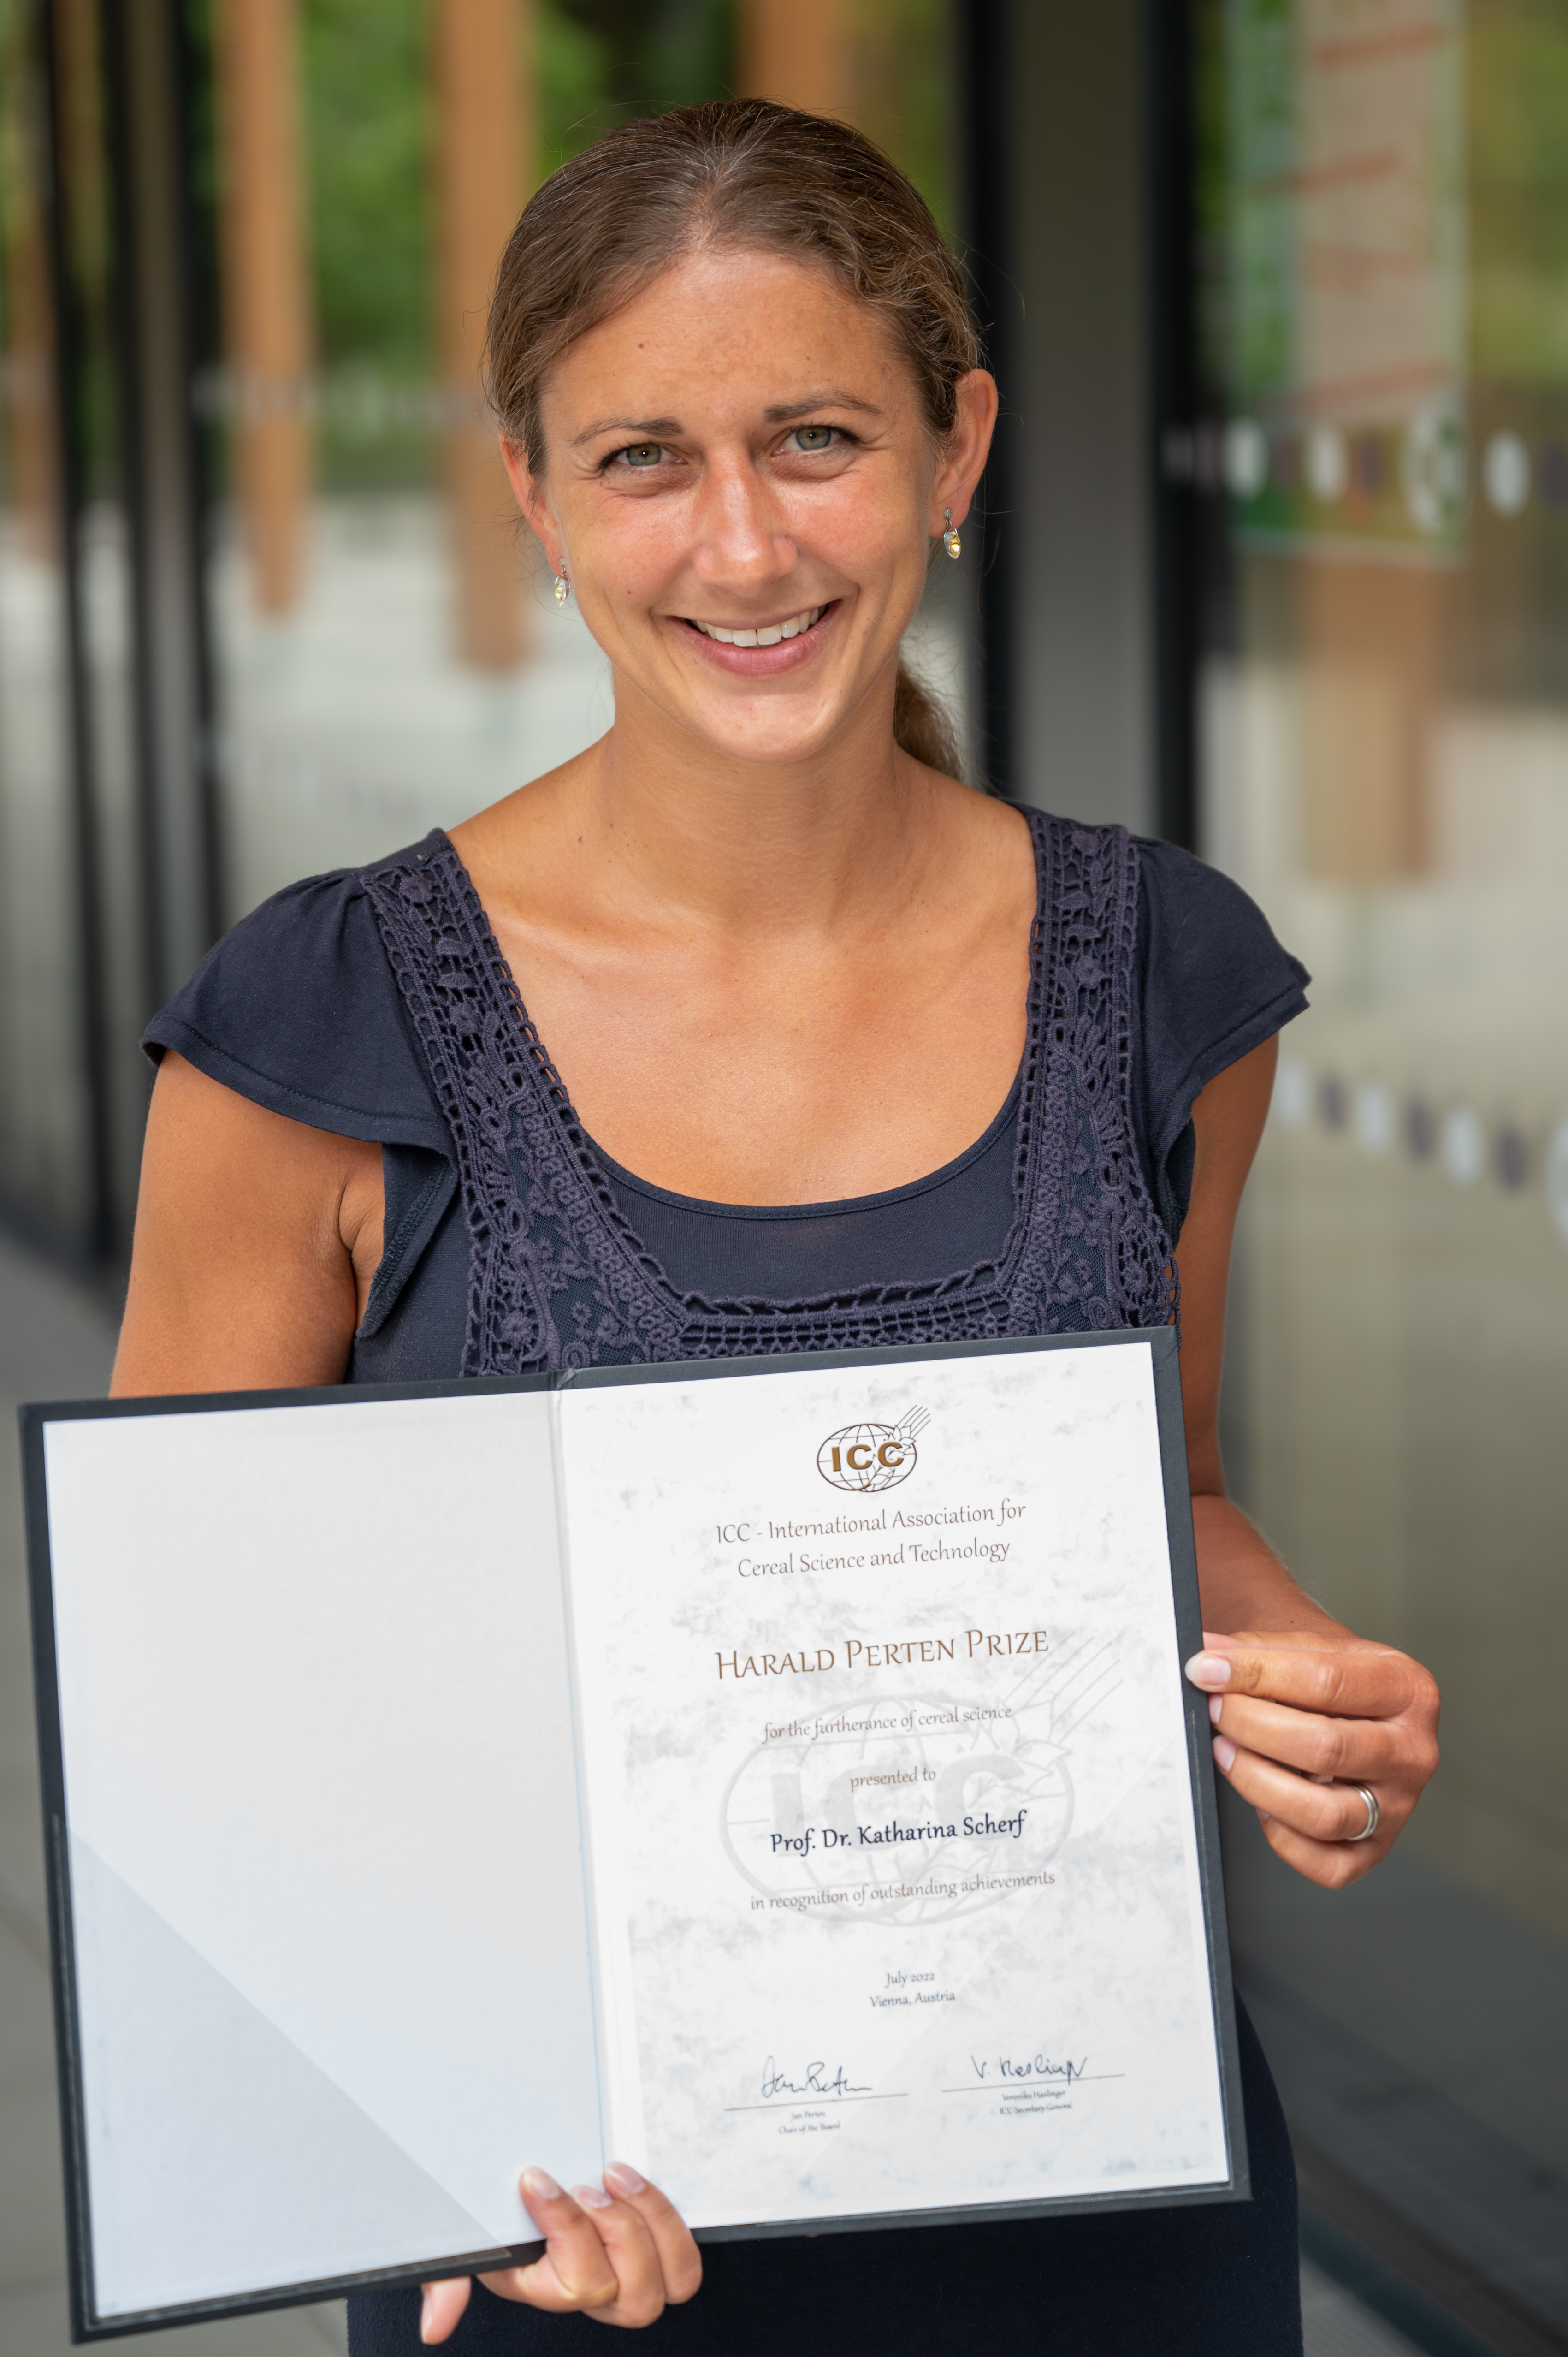 Katharina Scherf holding the certificate of the Harald Perten Prize awarded by the International Association for Cereal Science and Technology (ICC)